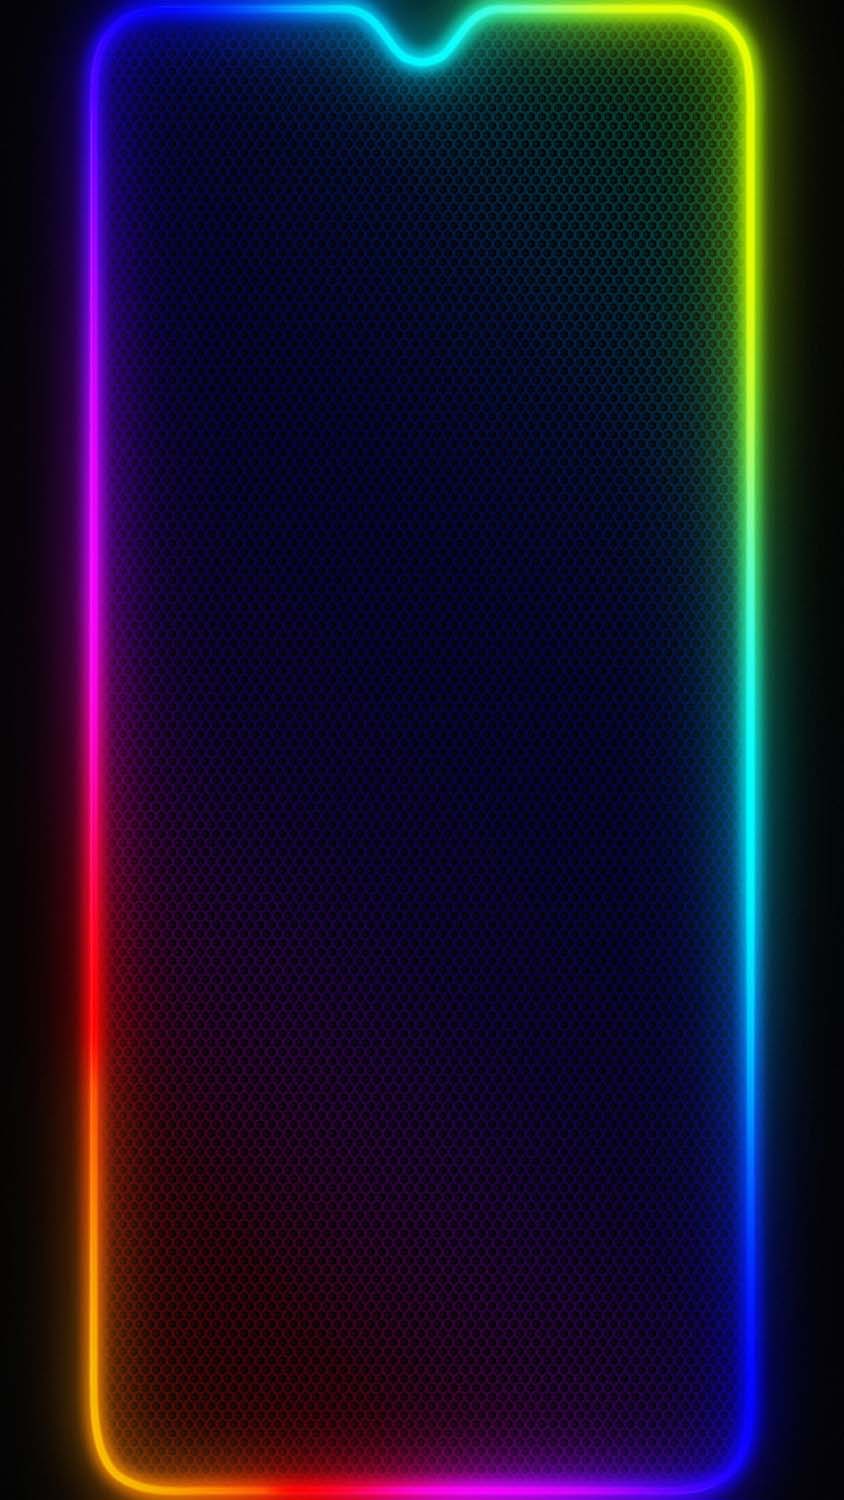 30 Rgb HD Wallpapers and Backgrounds